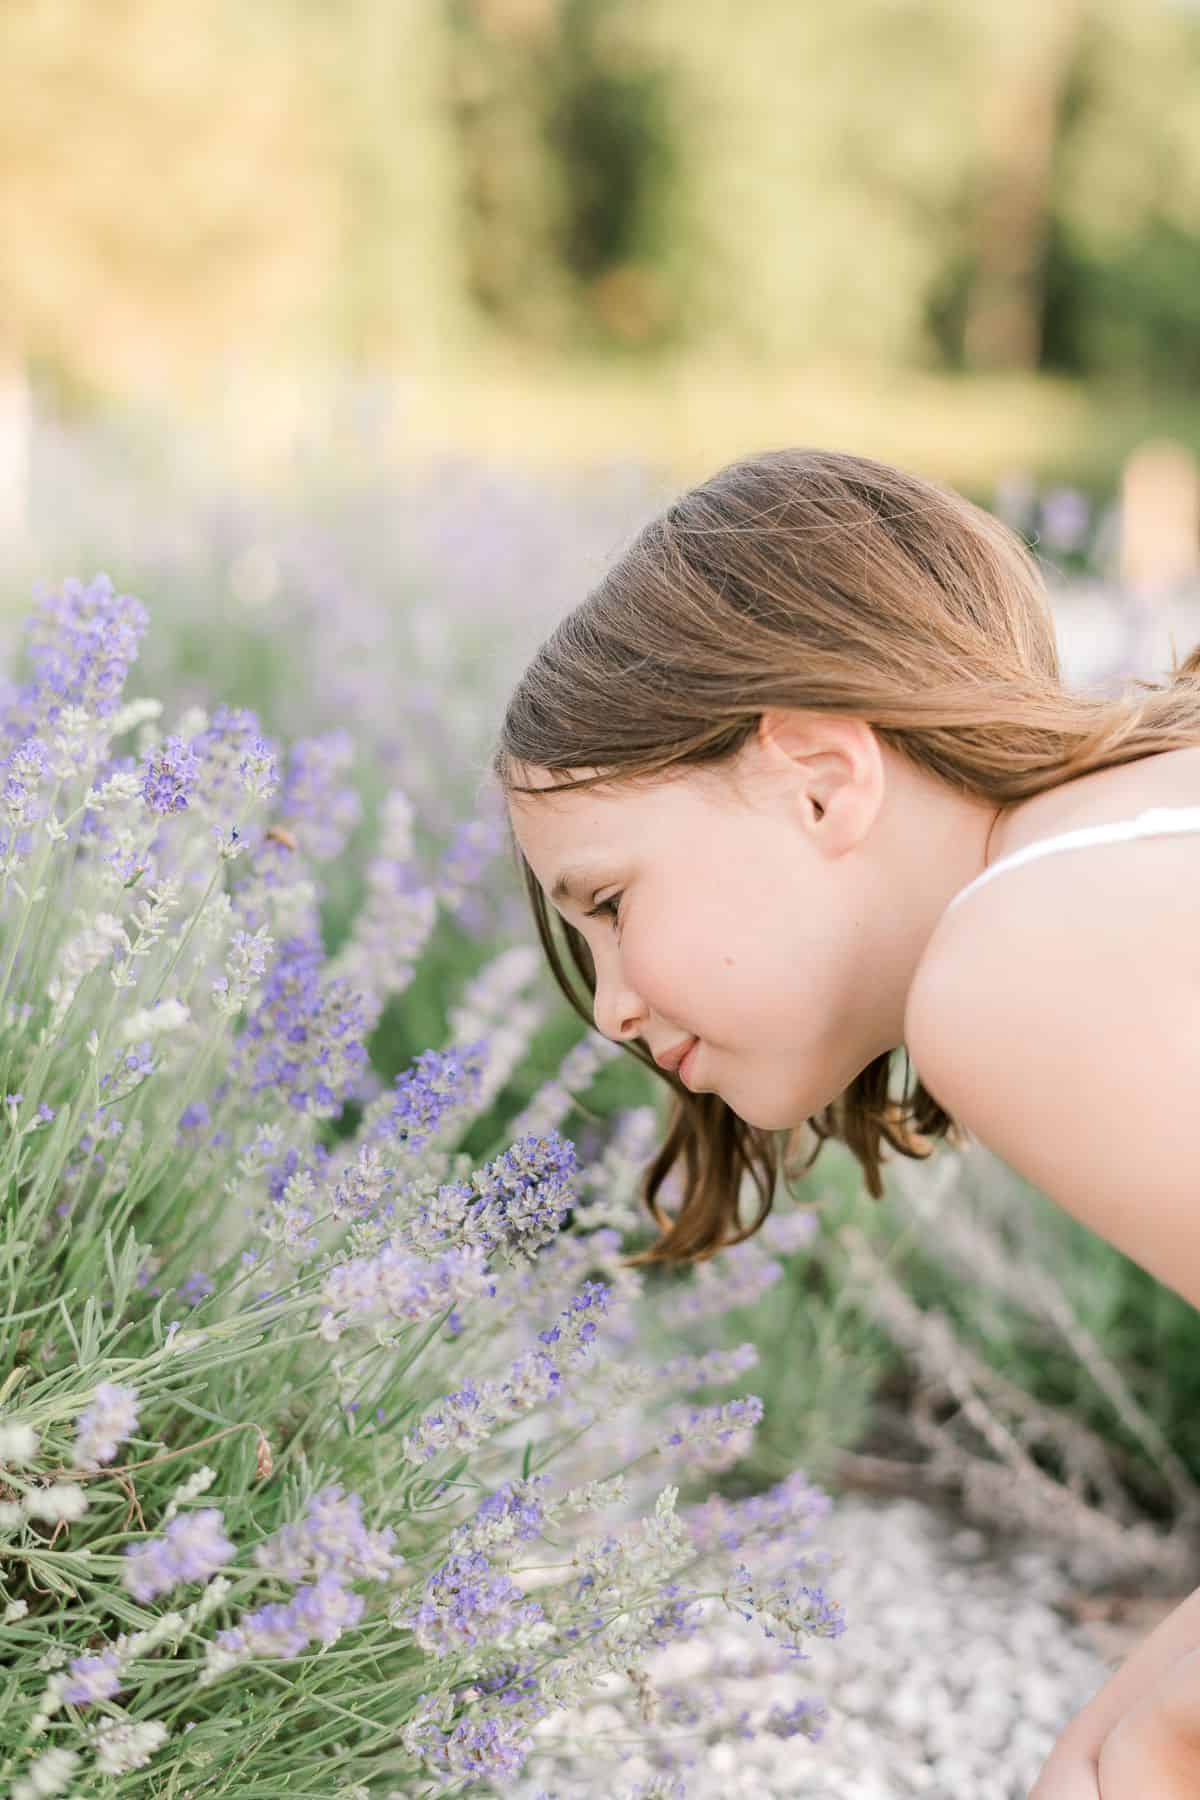 A little girl leaning in to sniff English lavender growing in a field.